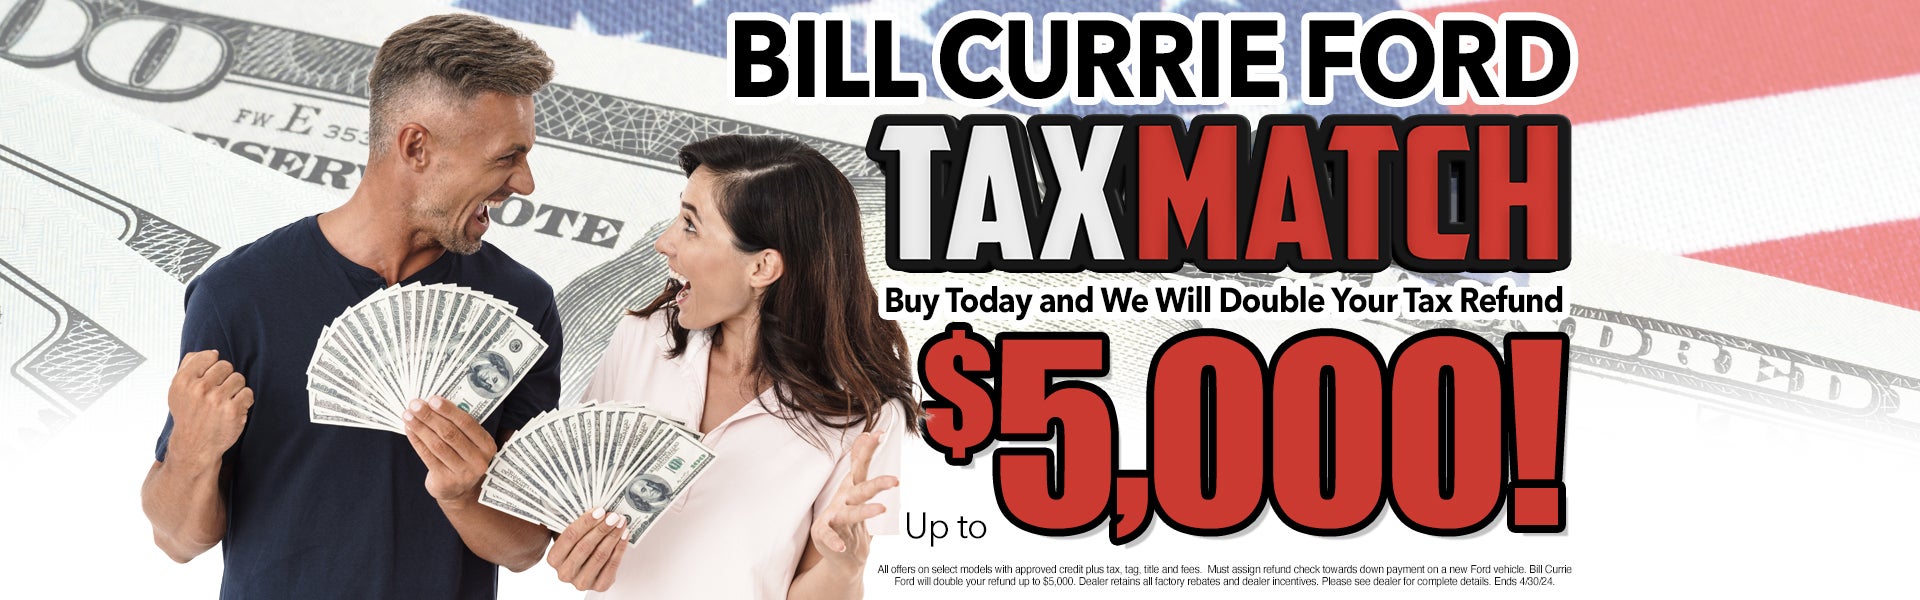 Bill Currie Ford Tax Match